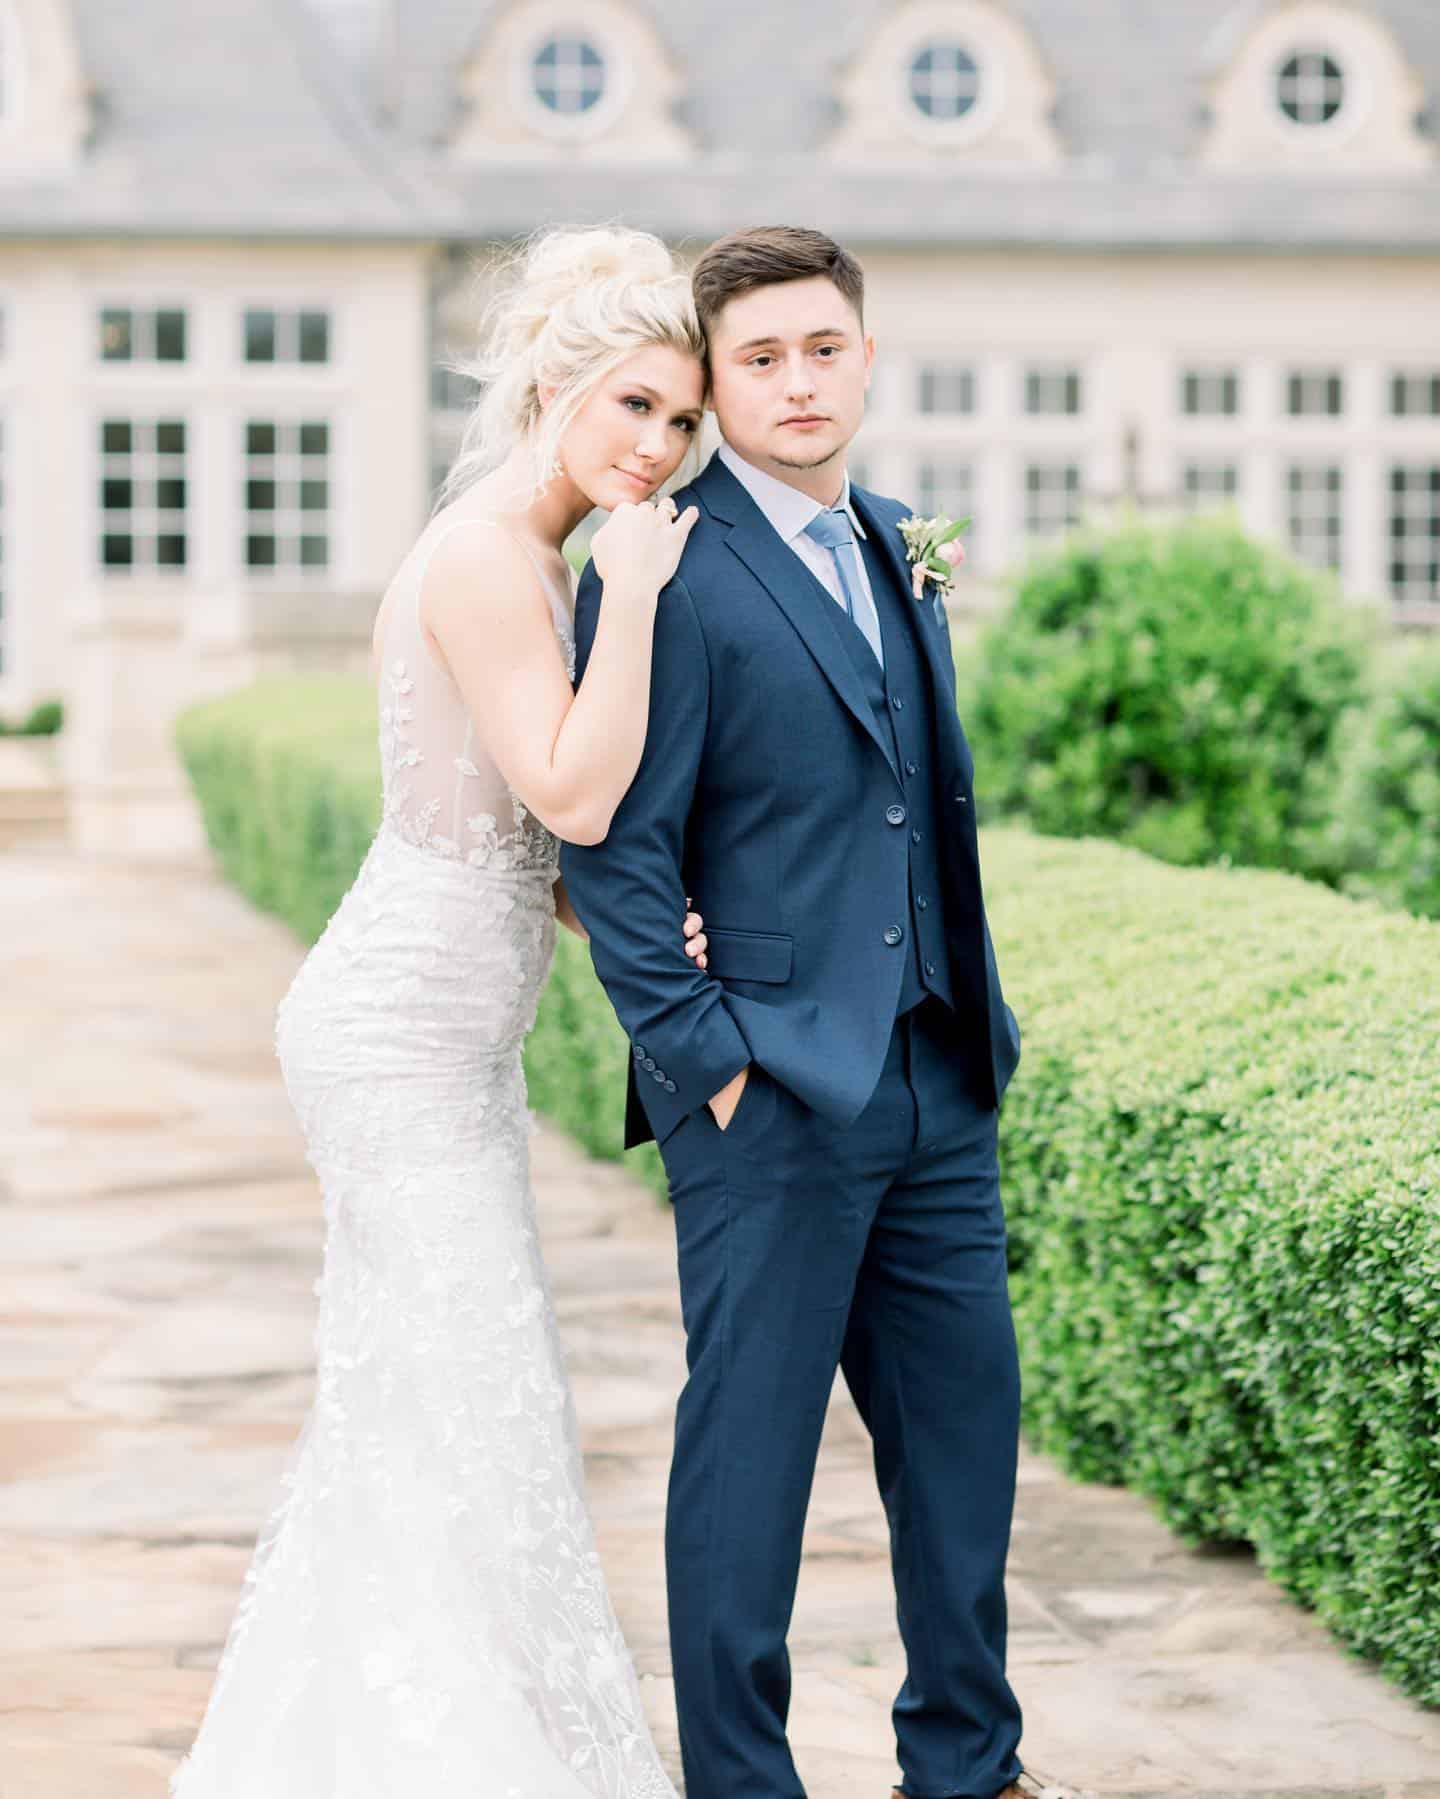 A groom in a navy blue suit stands with his bride resting her hands and head on his shoulder.